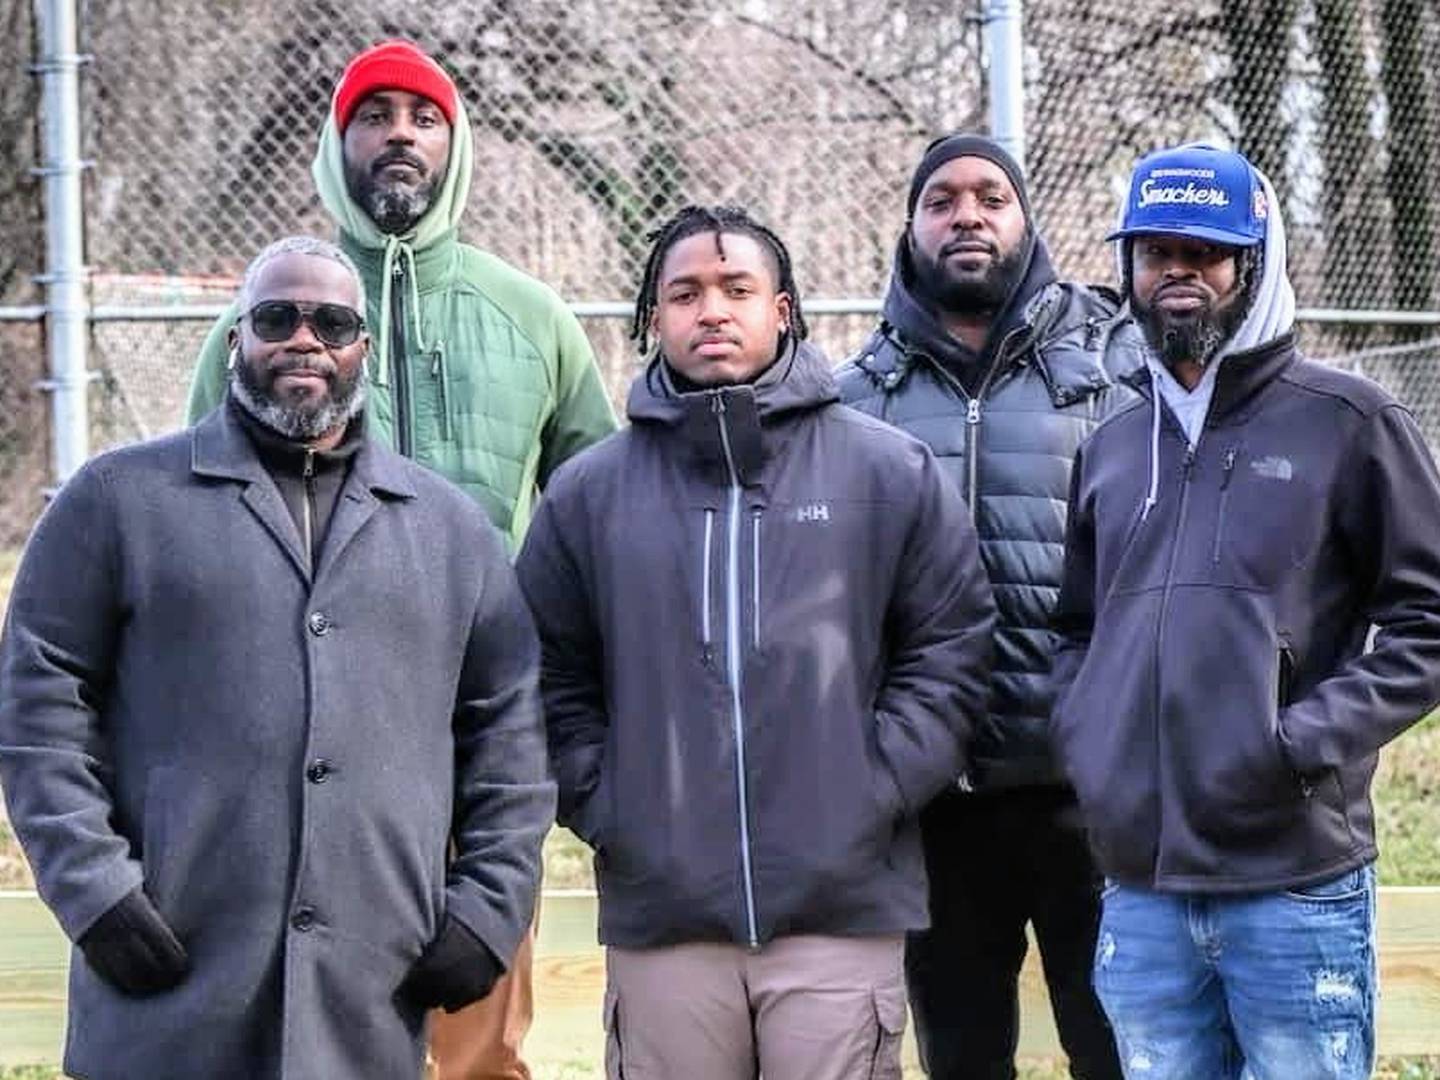 Members of the Annual Fathers Day Foundation met recently at Browns Woods Park, from left, James Henson, Kenyatta Rowel, Brandon Johnson, Tyrone Johnson and Devon Edwards Sr.